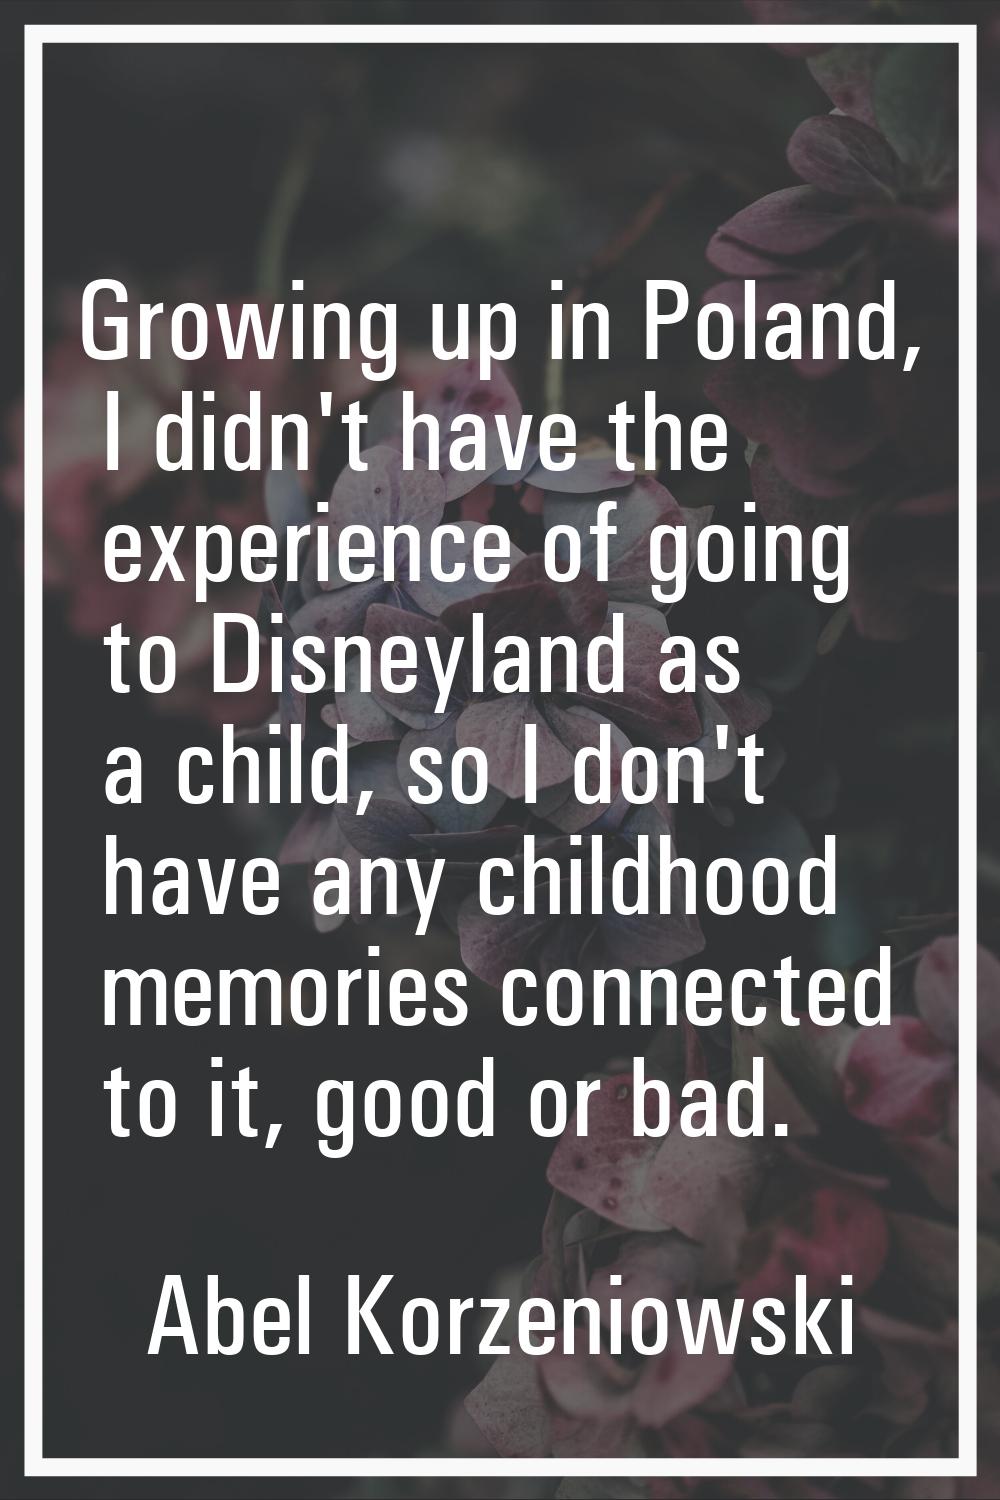 Growing up in Poland, I didn't have the experience of going to Disneyland as a child, so I don't ha